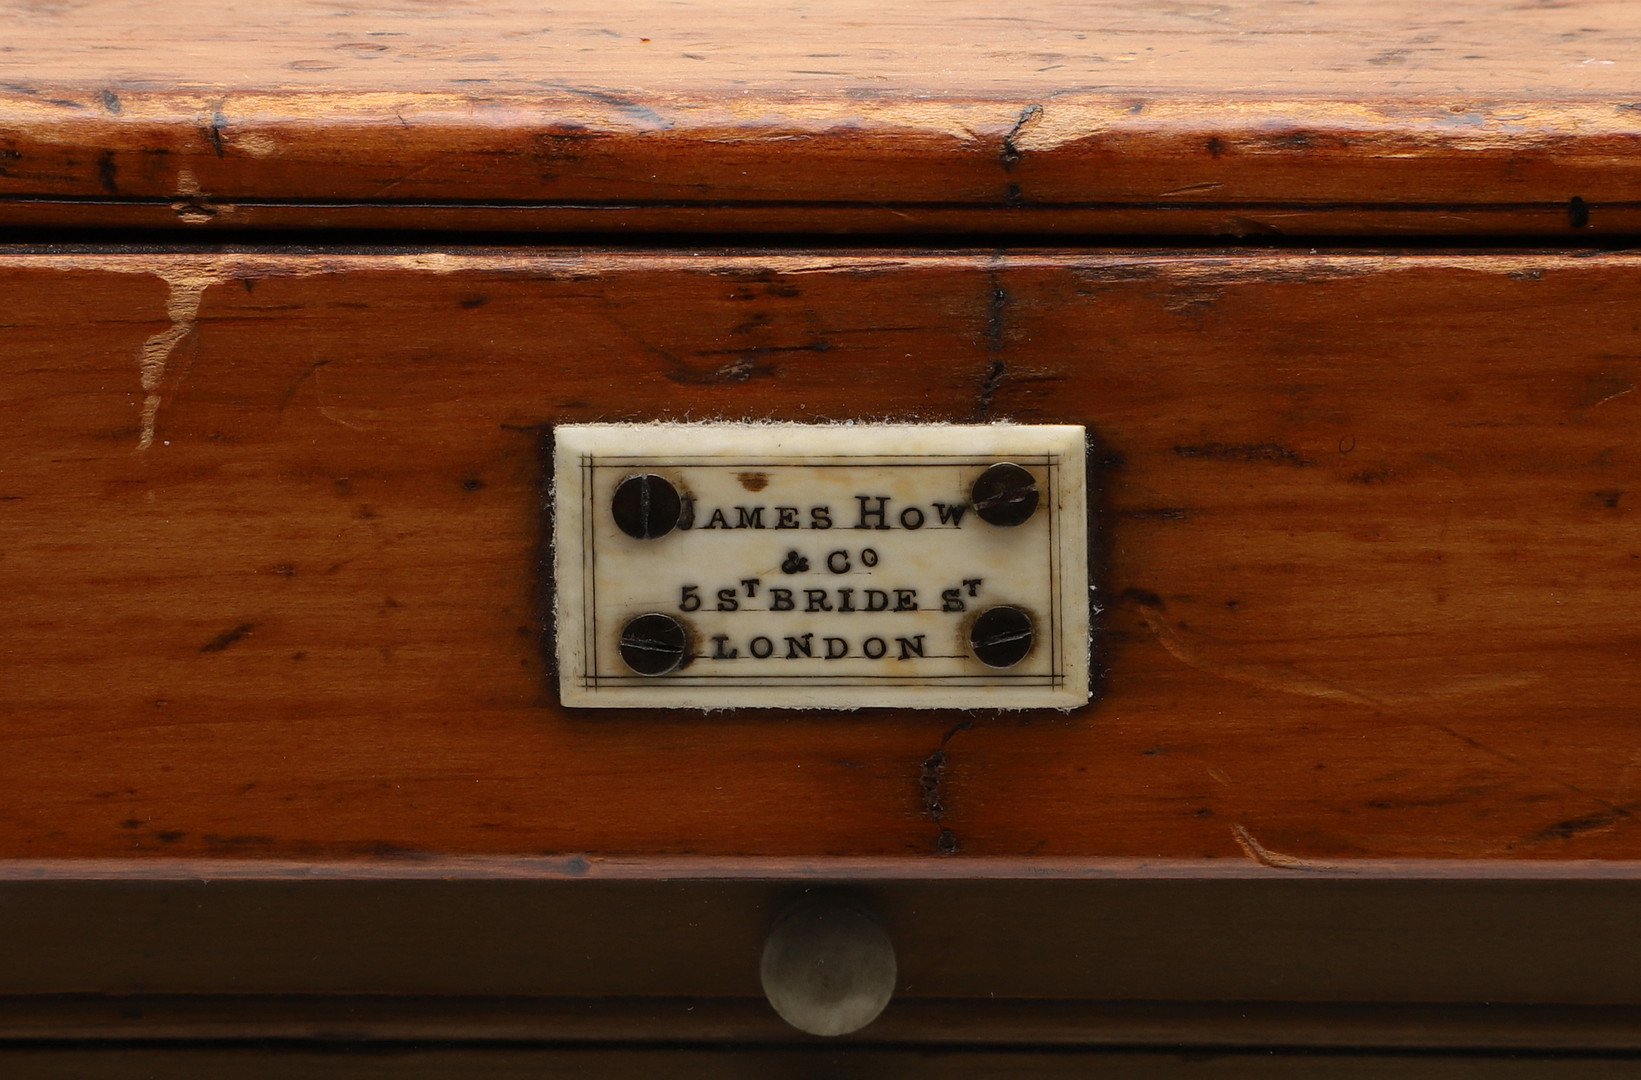 LARGE MICROSCOPE CABINET - JAMES HOW & CO, LONDON. - Image 5 of 10